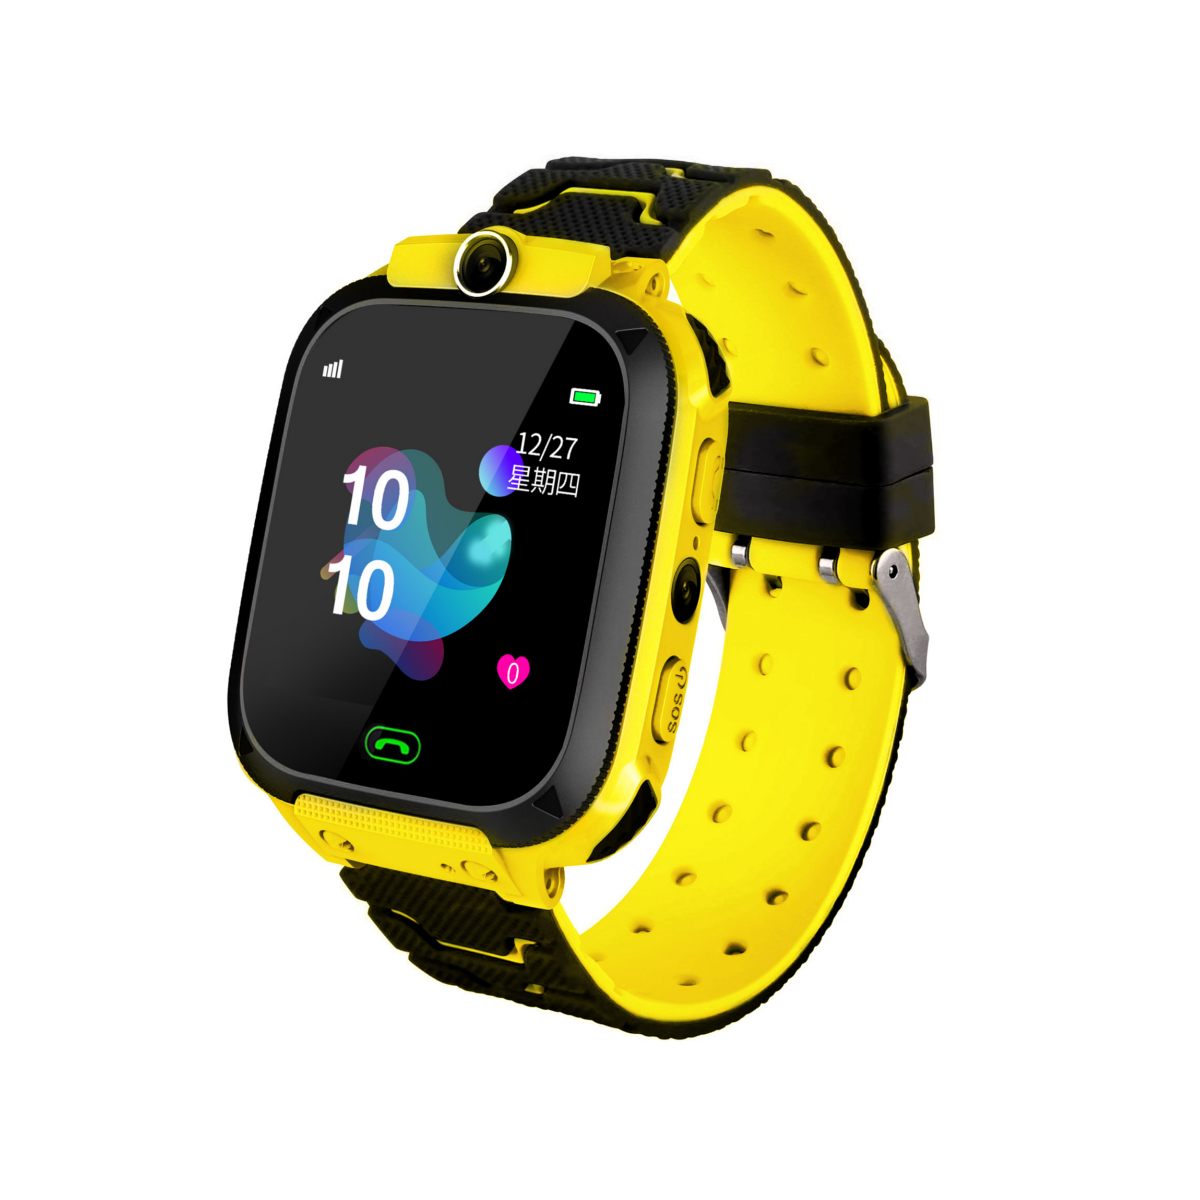 

Anti-lost Smart Watch LSB Tracker SOS Call SIM Gifts For Child Kids